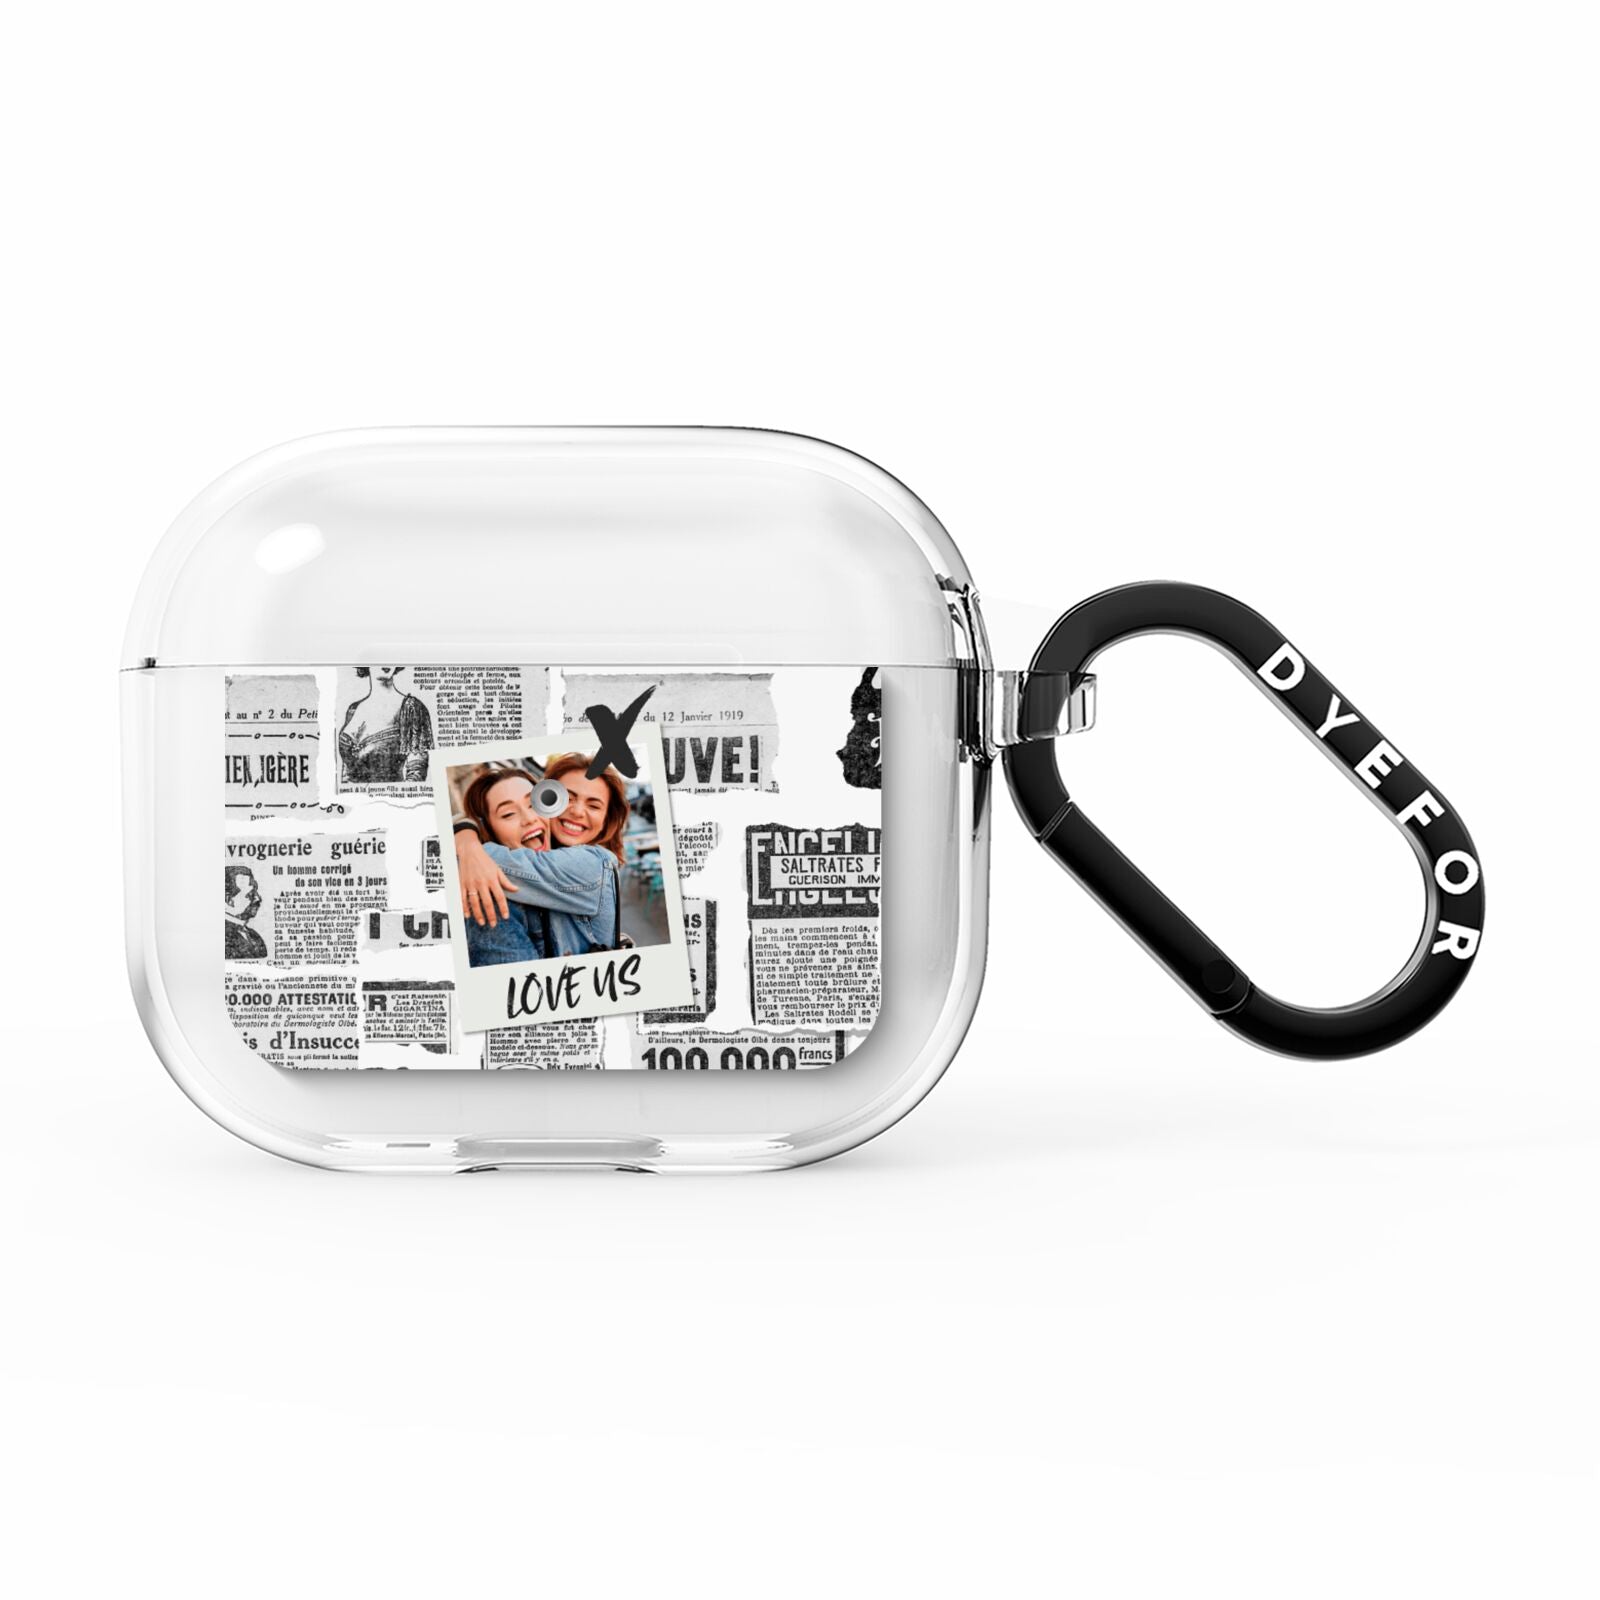 Newspaper Collage Photo Personalised AirPods Clear Case 3rd Gen